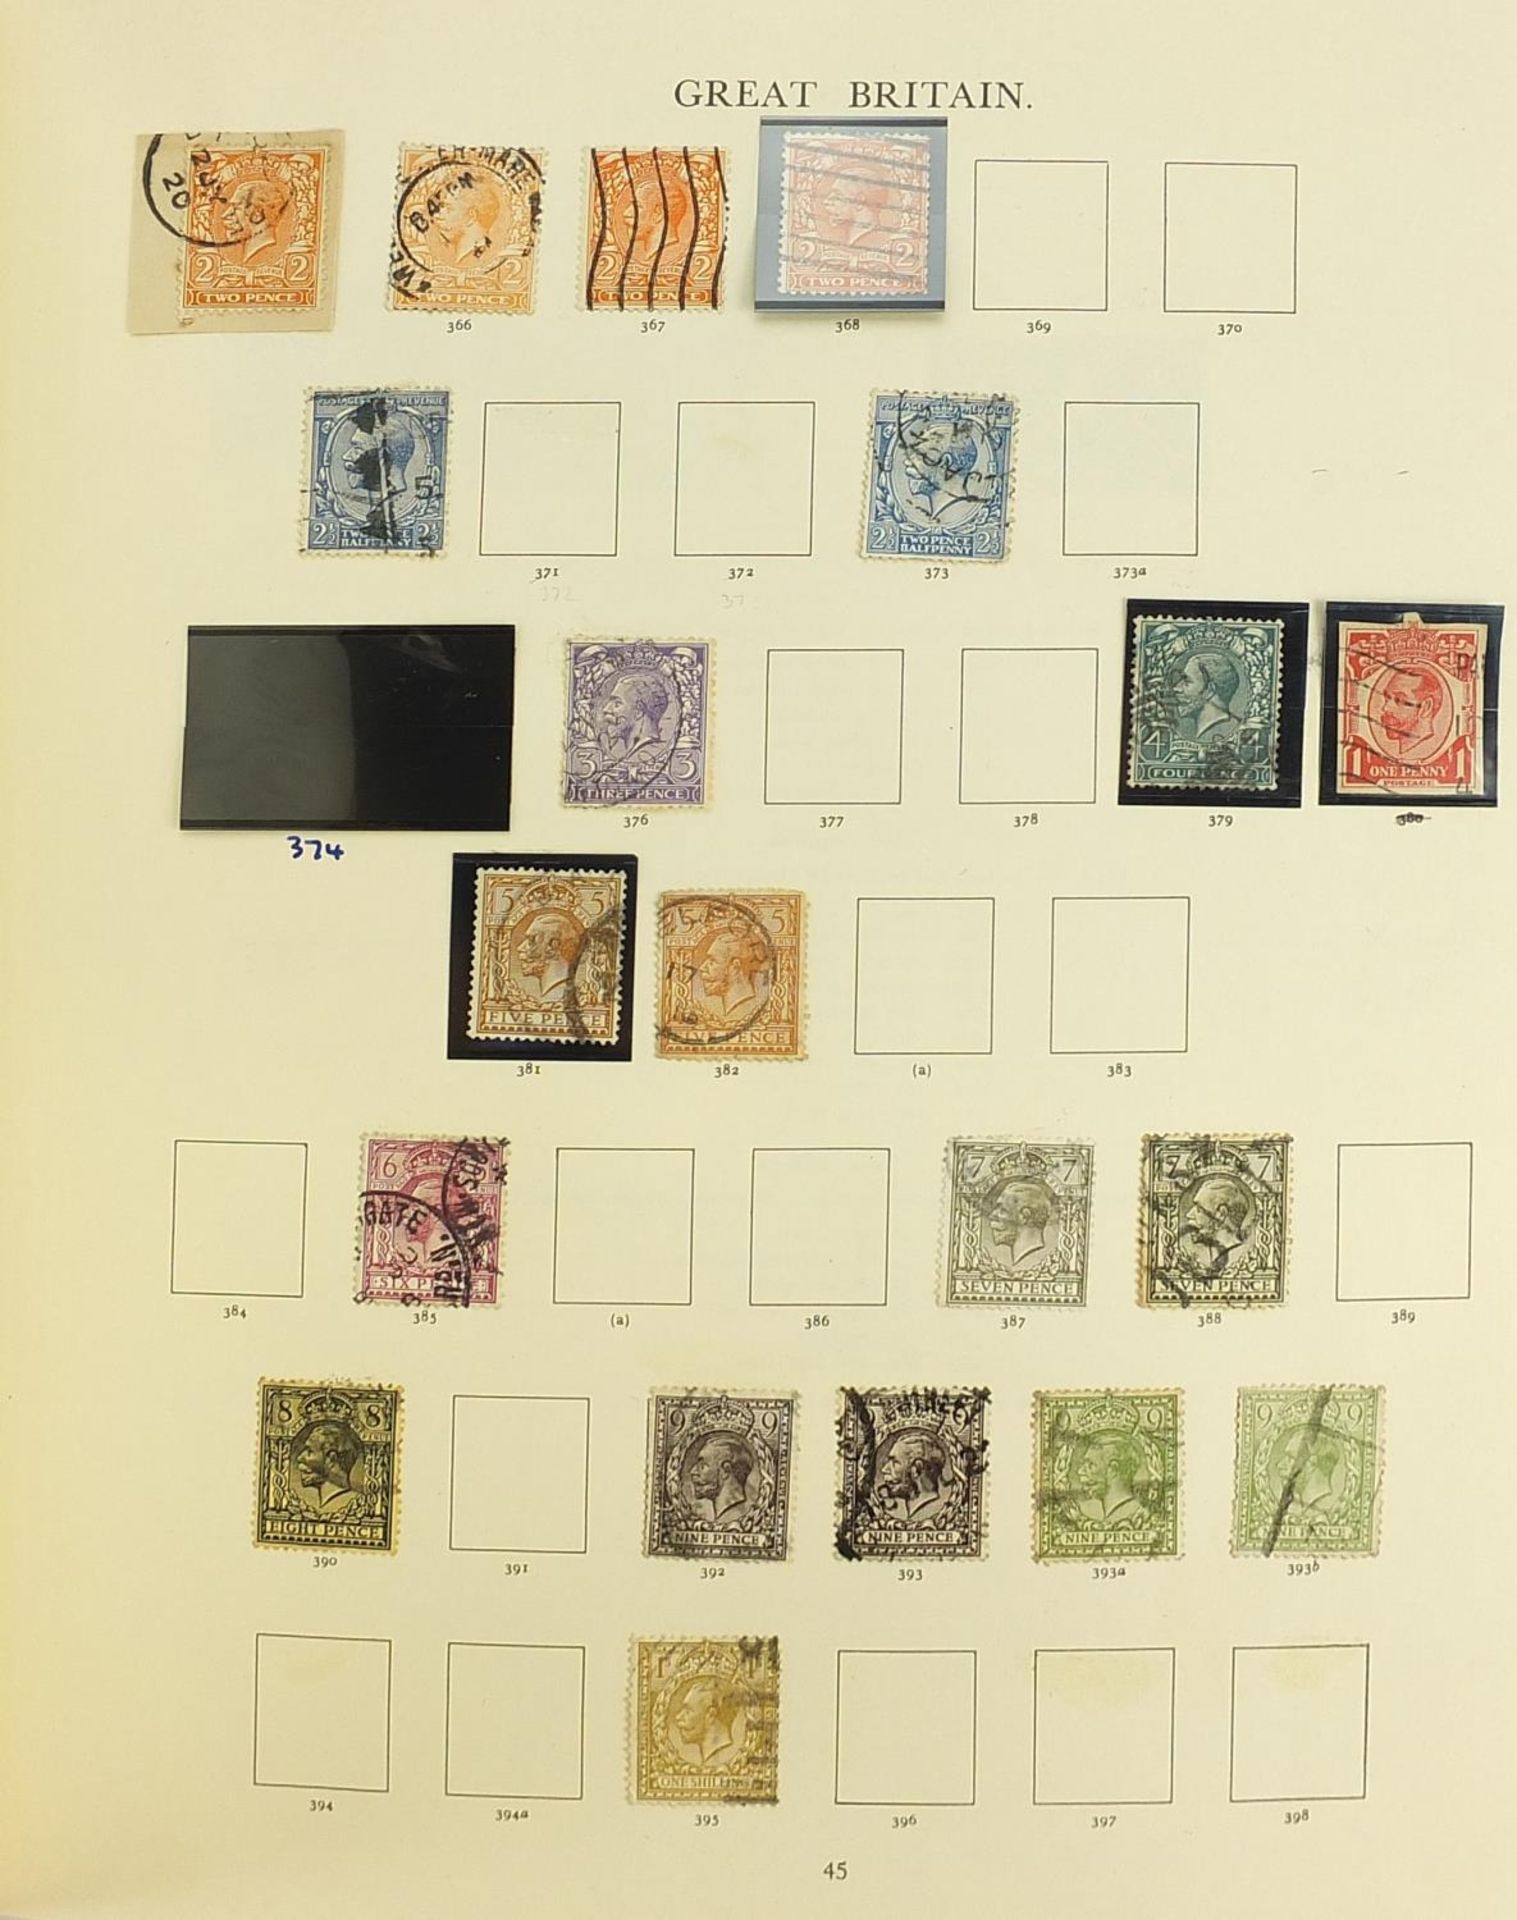 Collection of British stamps arranged in an album